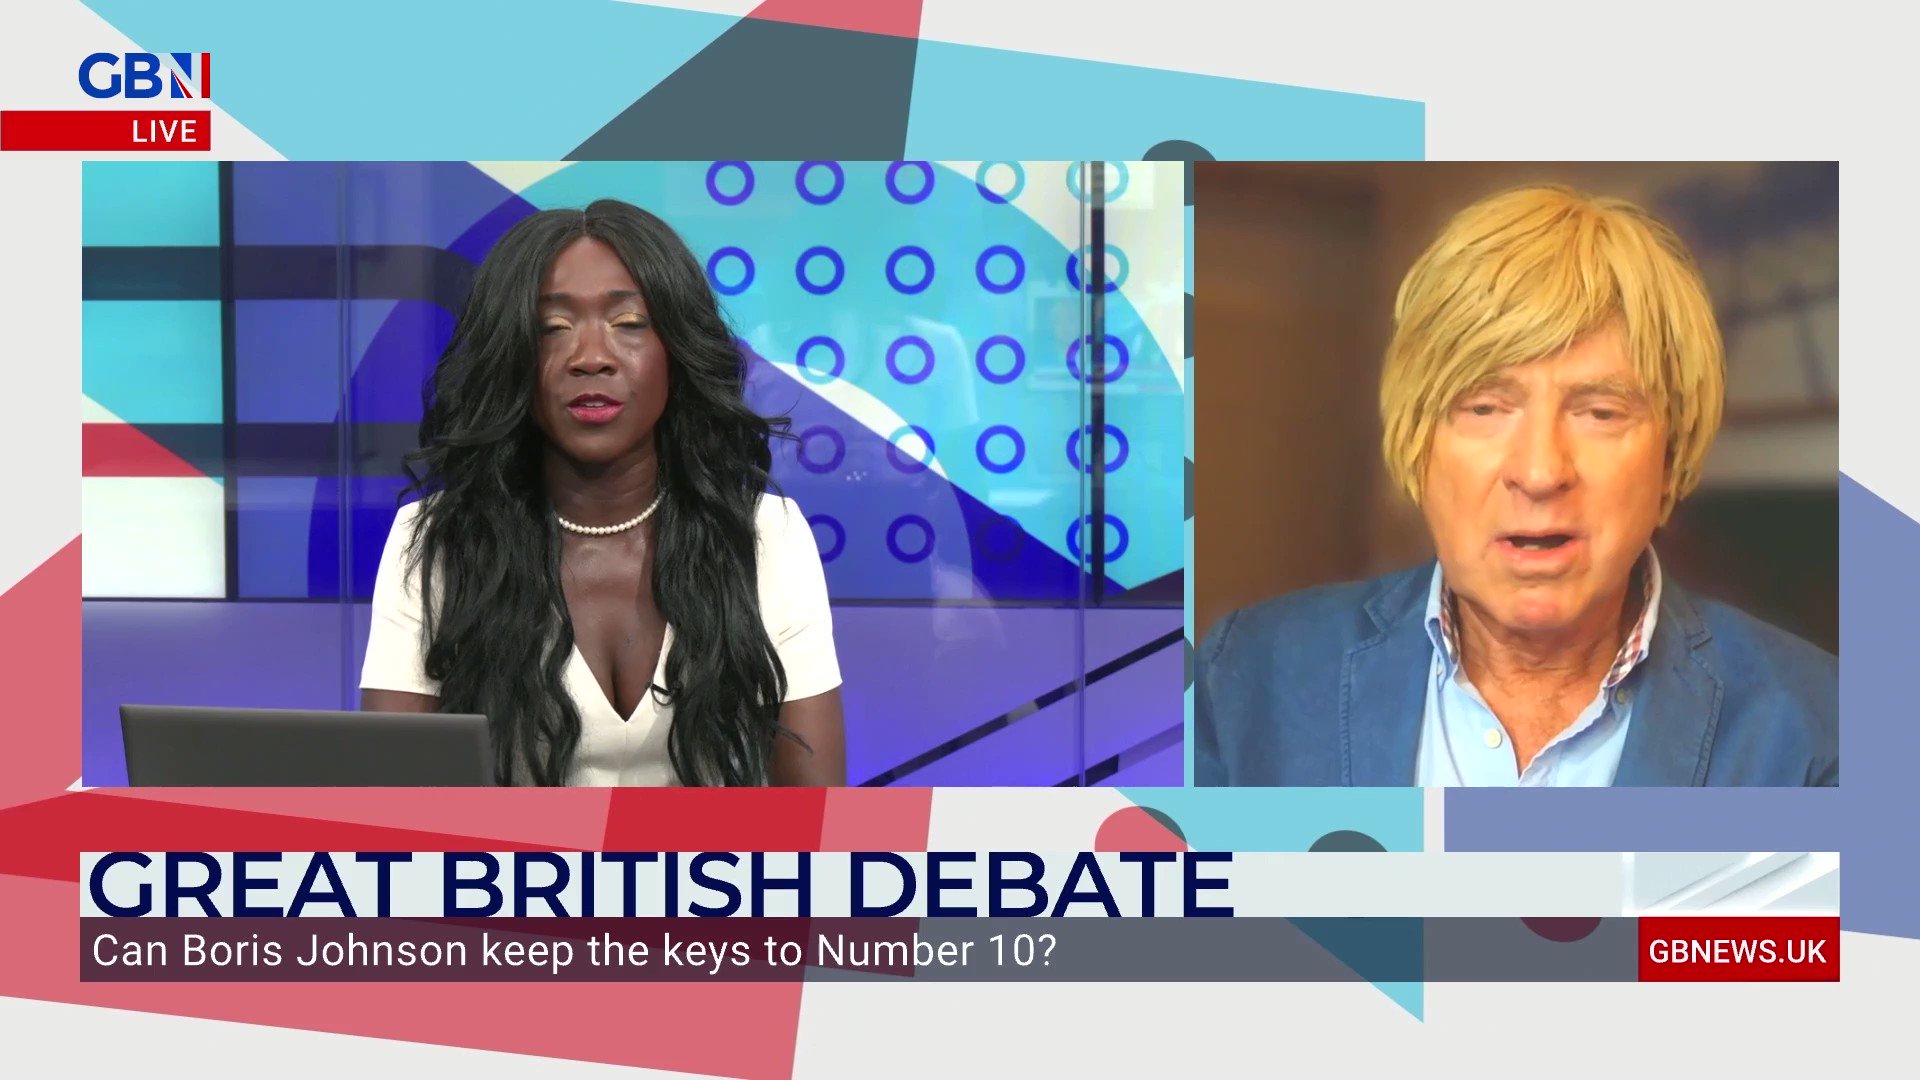 ‘20,000 Conservative voters didn’t switch parties, they just stayed at home’ | Michael Fabricant MP